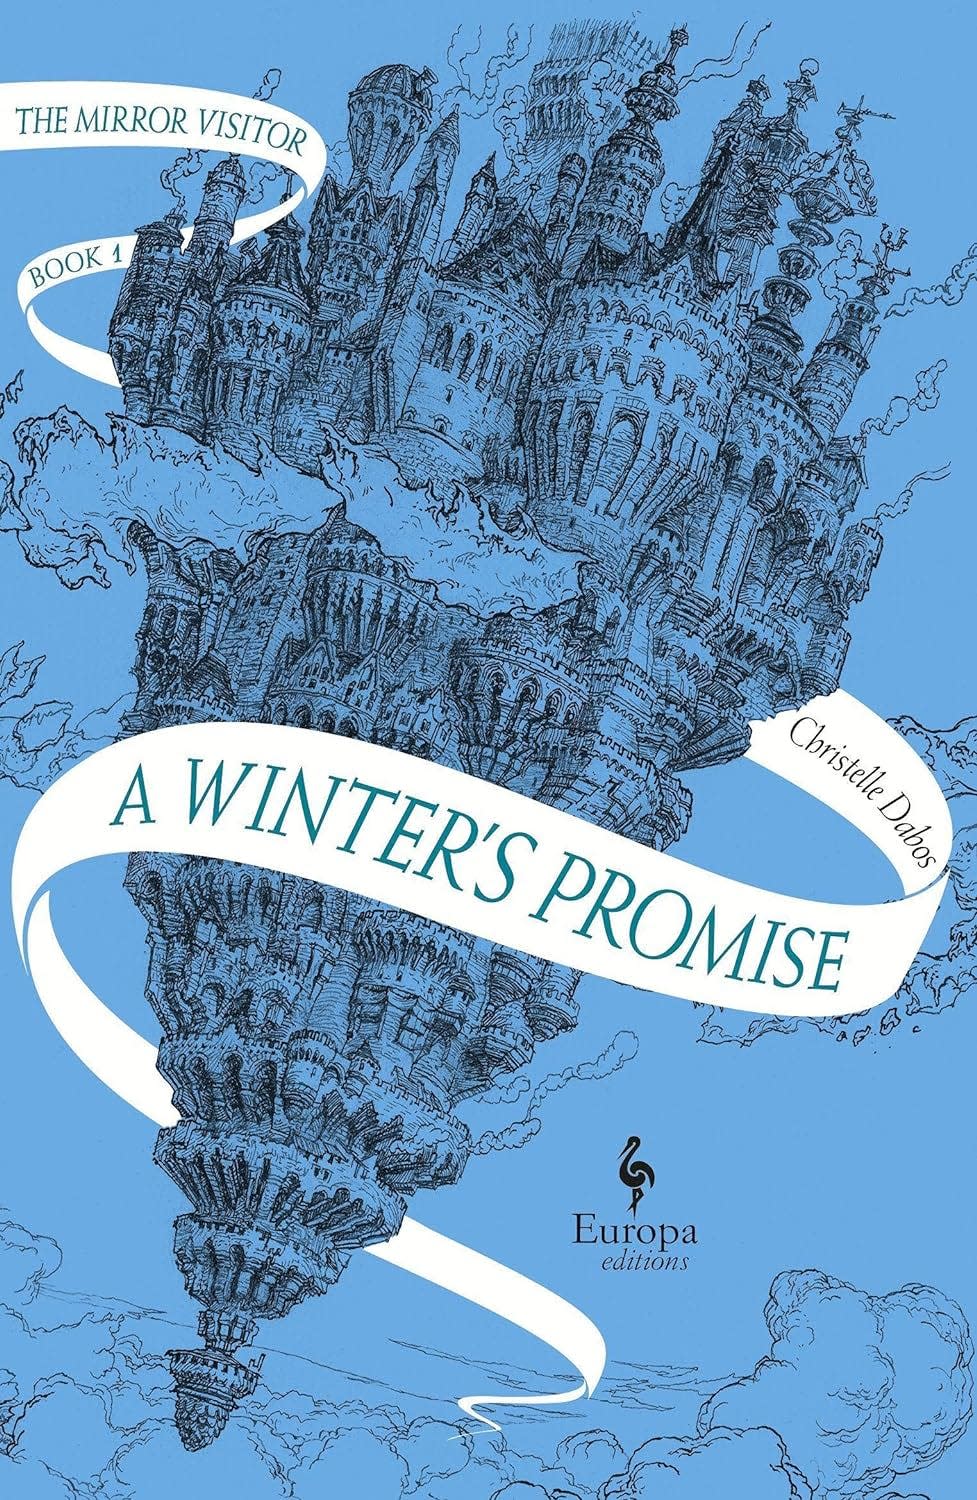 "A Winter's Promise"